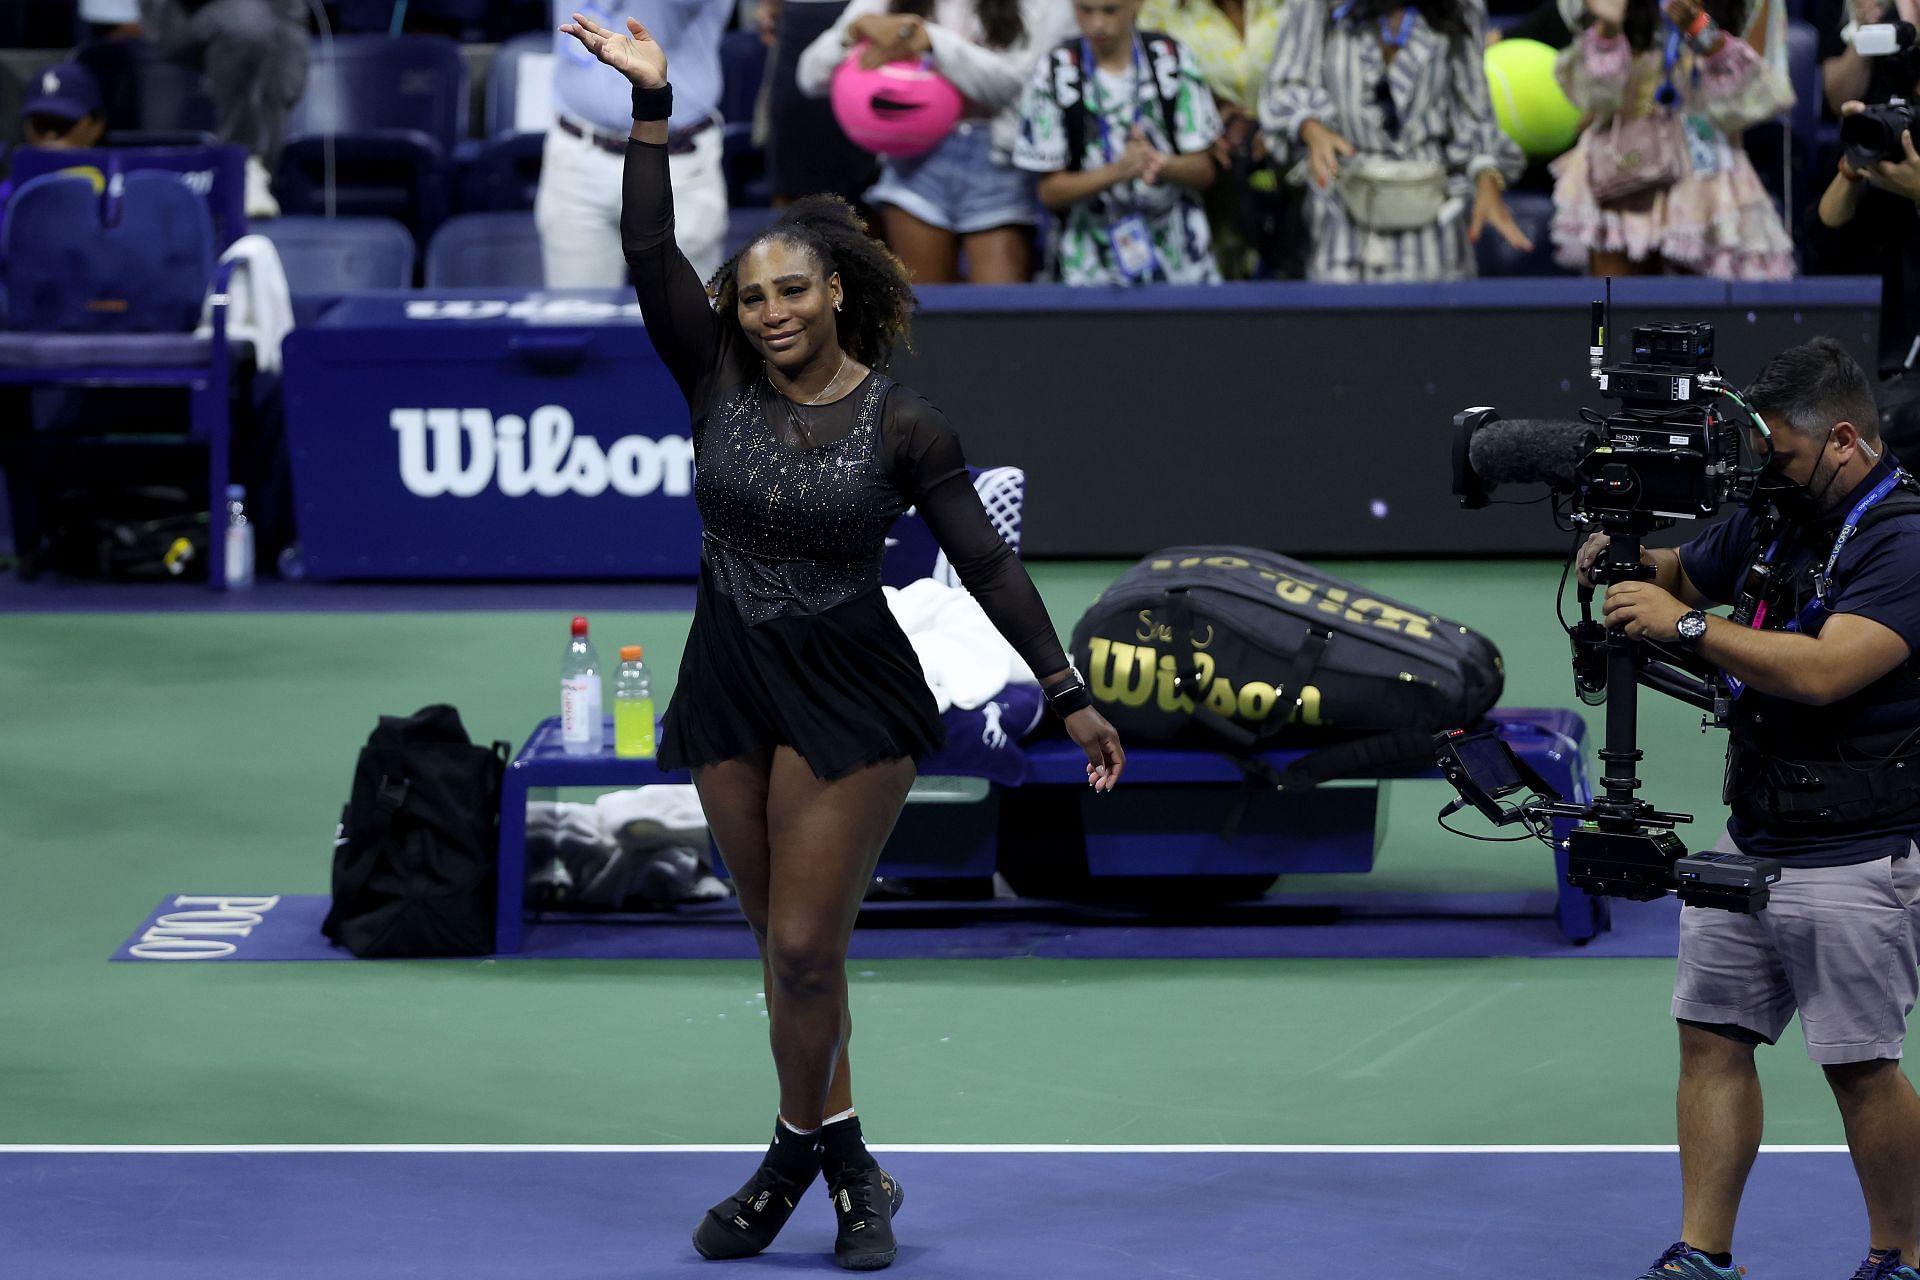 Serena Williams thanks fans after being beaten by Ajla Tomlijanovic at 2022 US Open